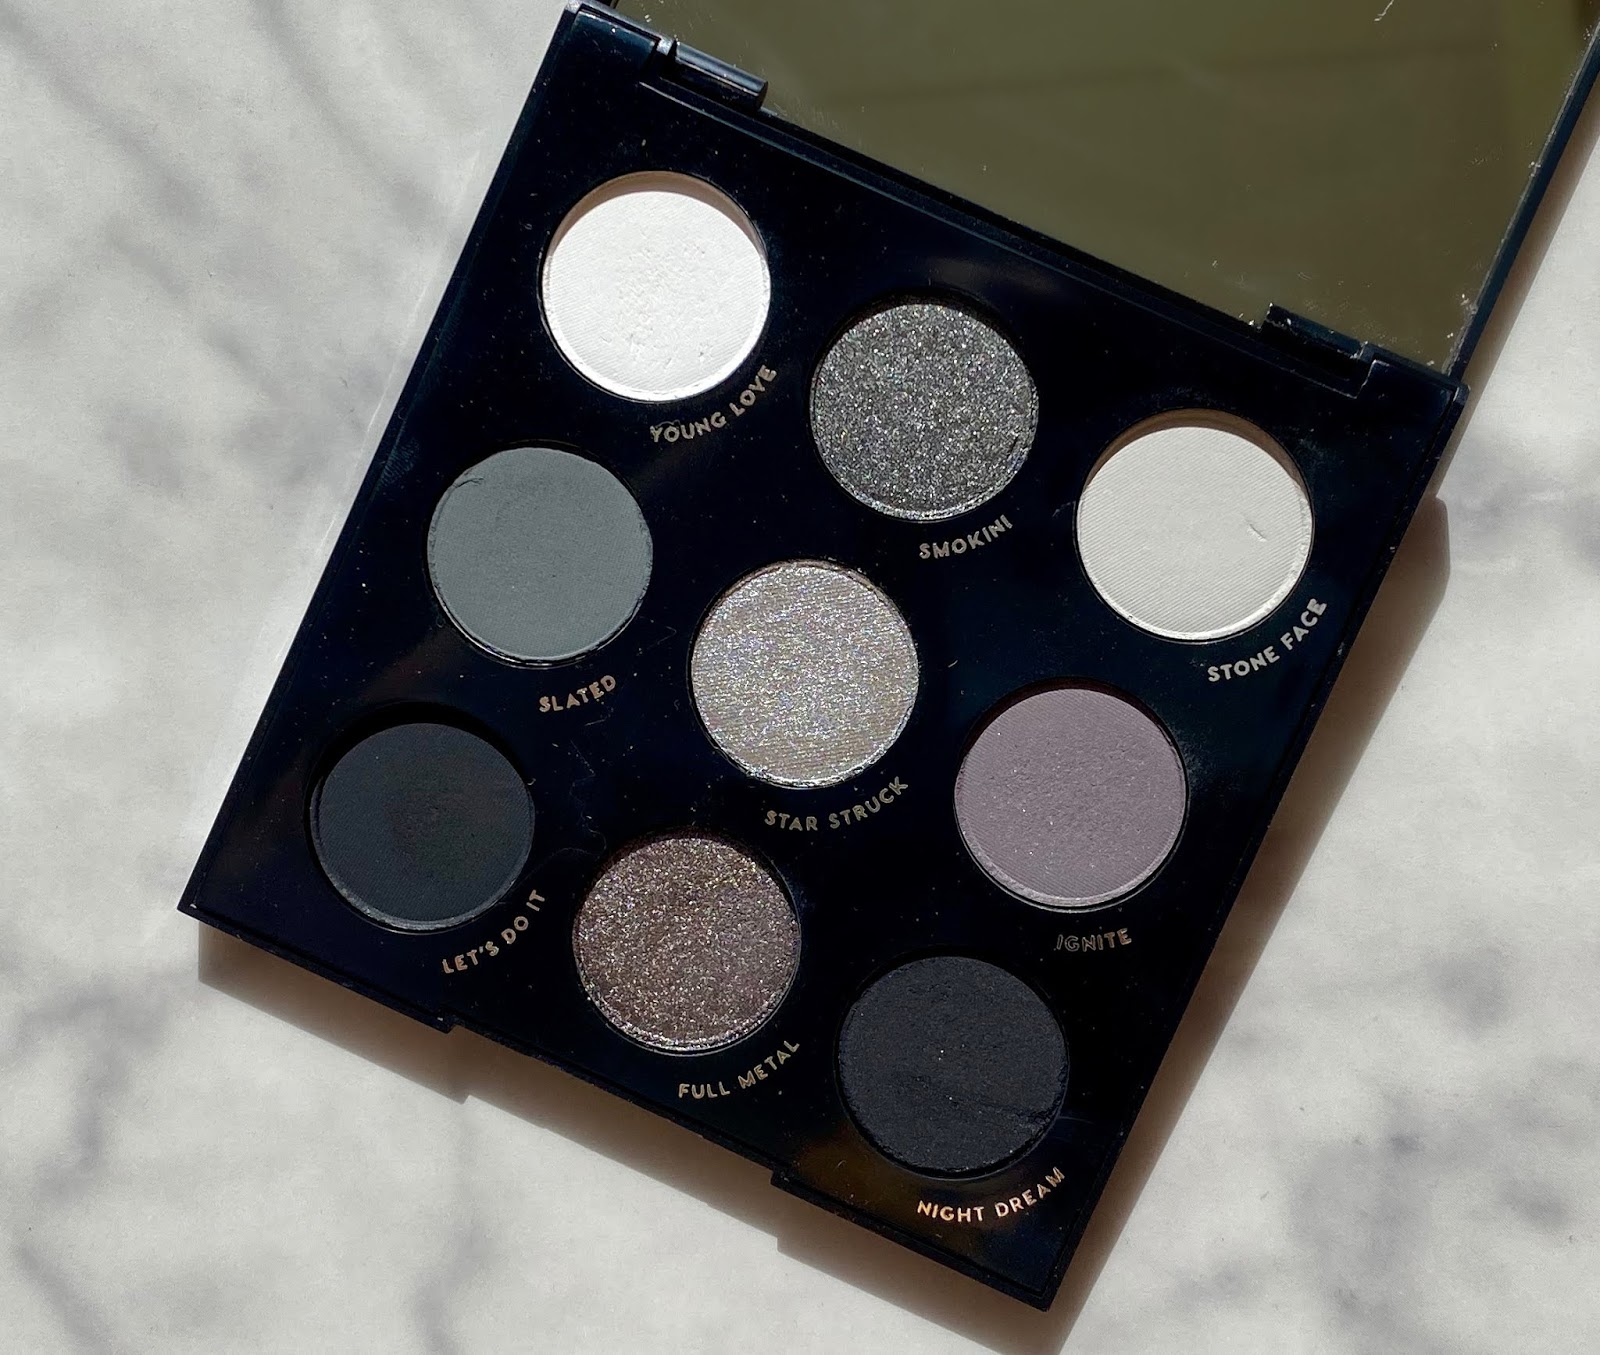 Colourpop Smoke Show Eyeshadow Palette Swatches And Review